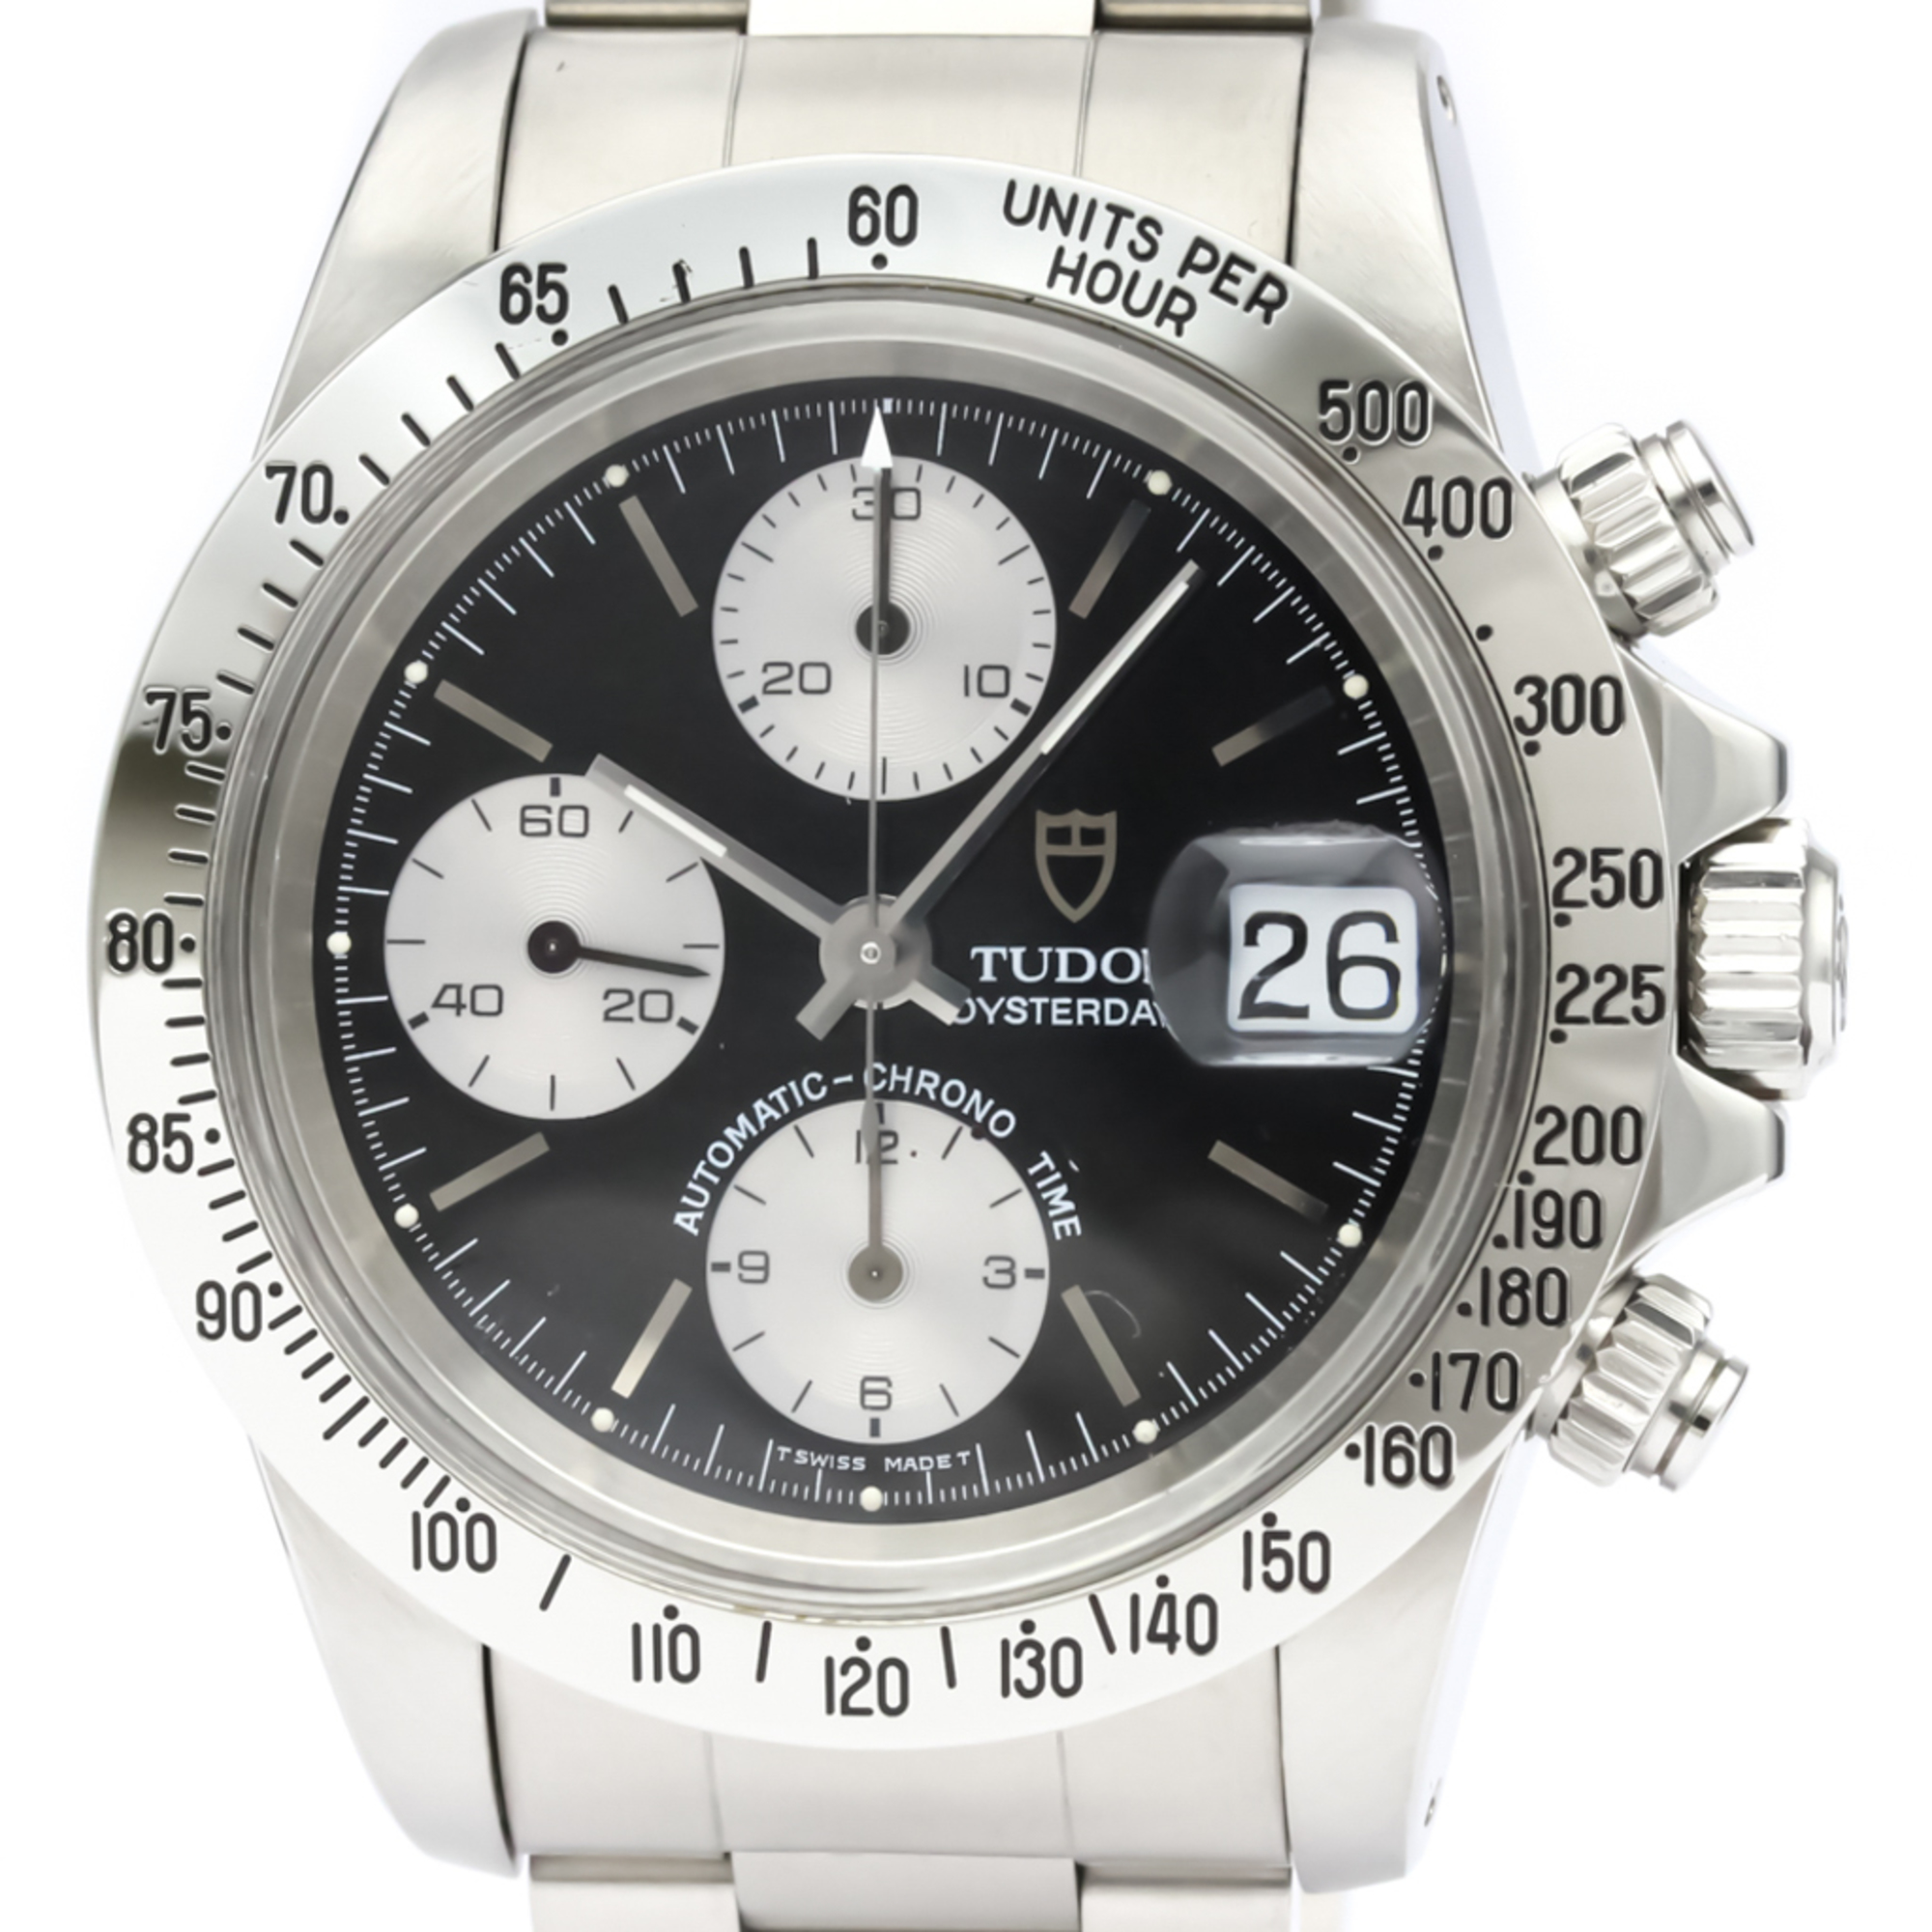 Tudor Chrono Time Automatic Stainless Steel Men's Sports Watch 79180